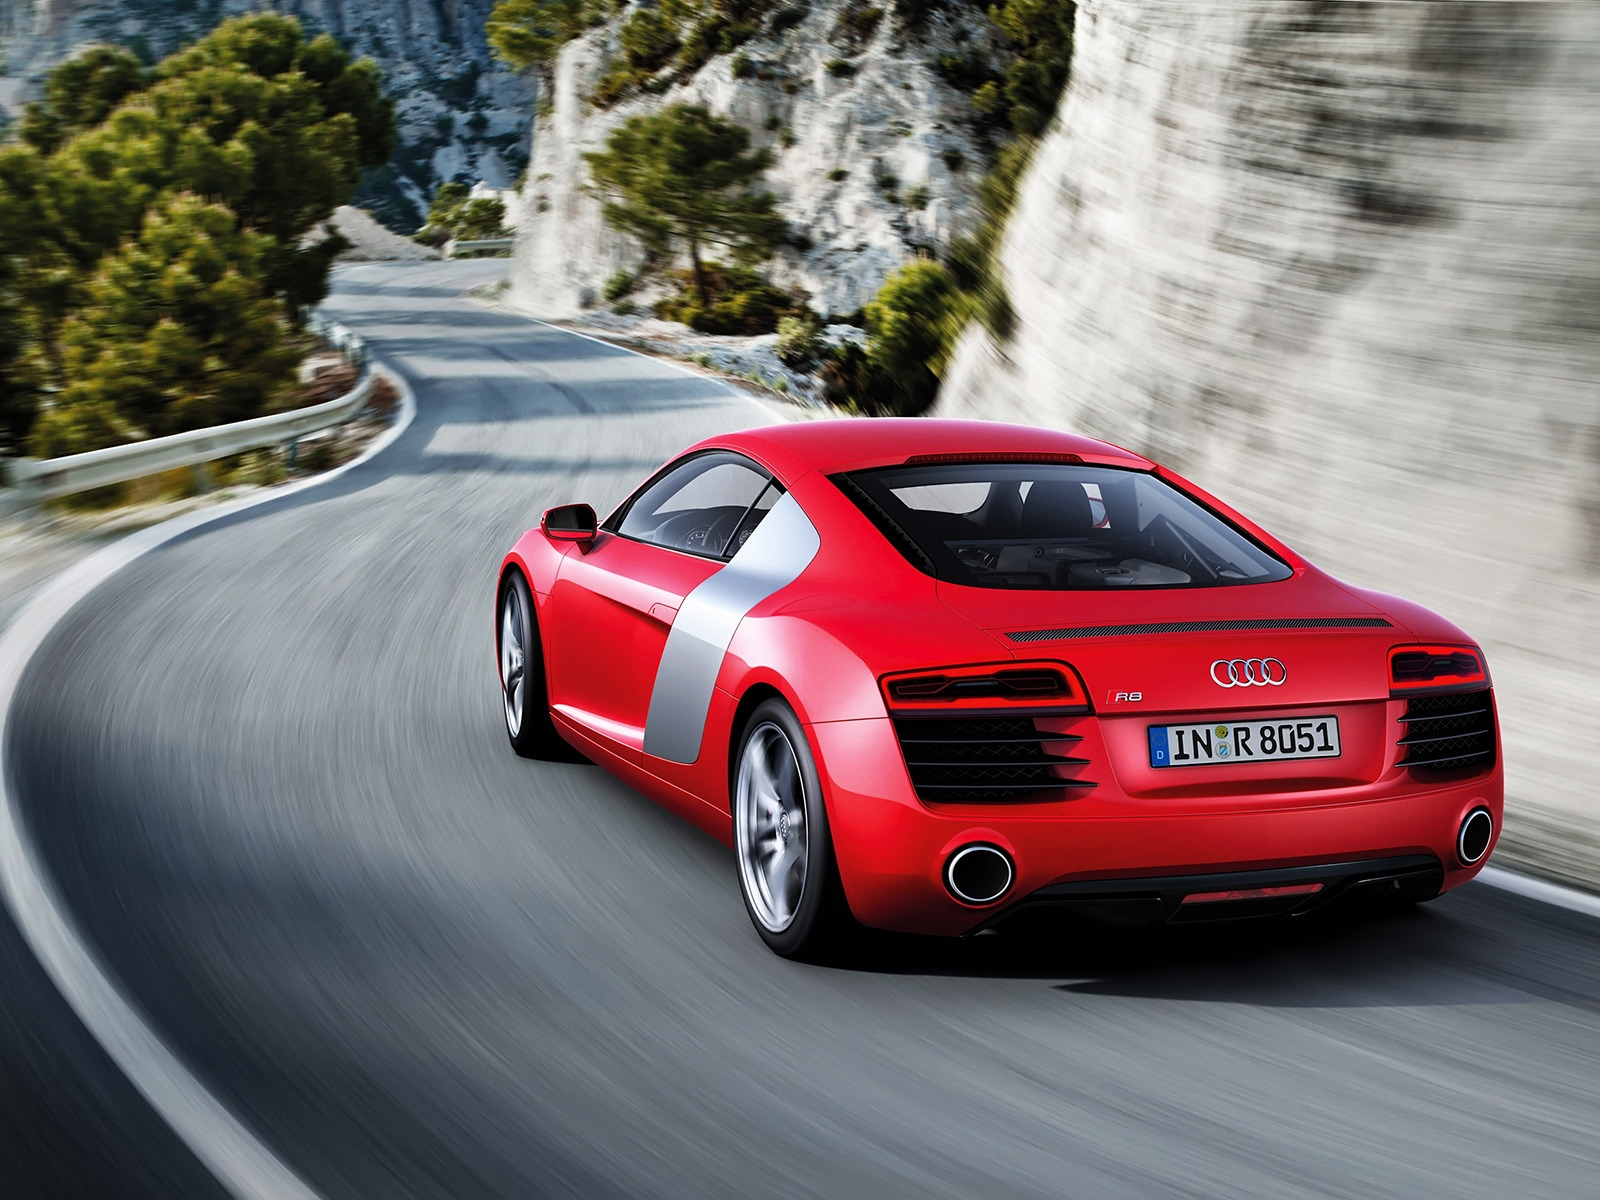 Gorgeous Red Audi R8 2013 for 1600 x 1200 resolution